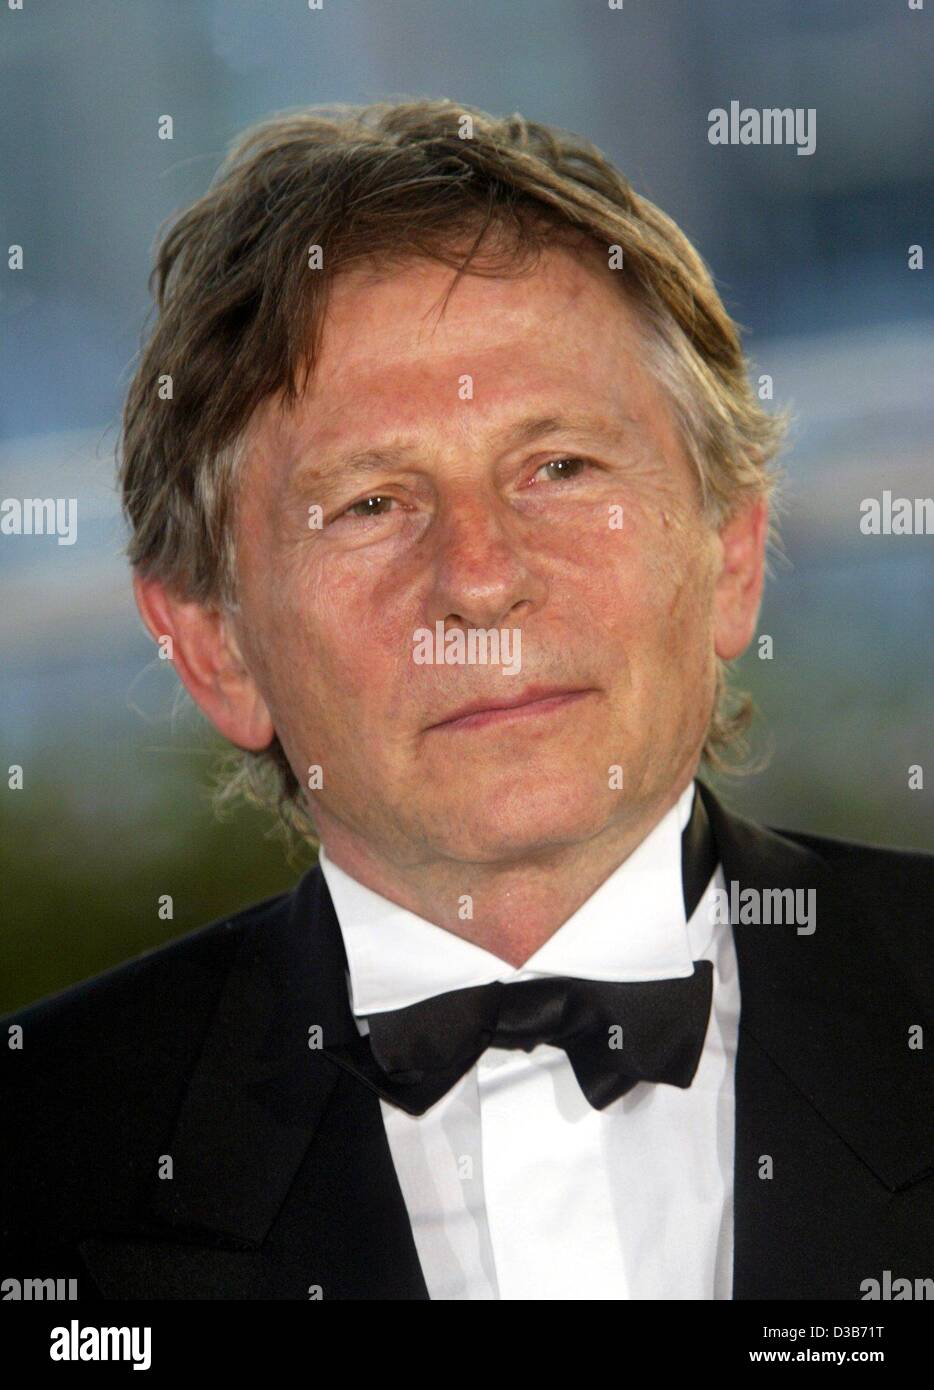 (dpa) - Roman Polanski, French film director of Polish descent, pictured at the 55th International Film Festival in Cannes, France, 26 May 2002. Polanski won the Golden Palm Award for his film 'The Pianist'. Stock Photo